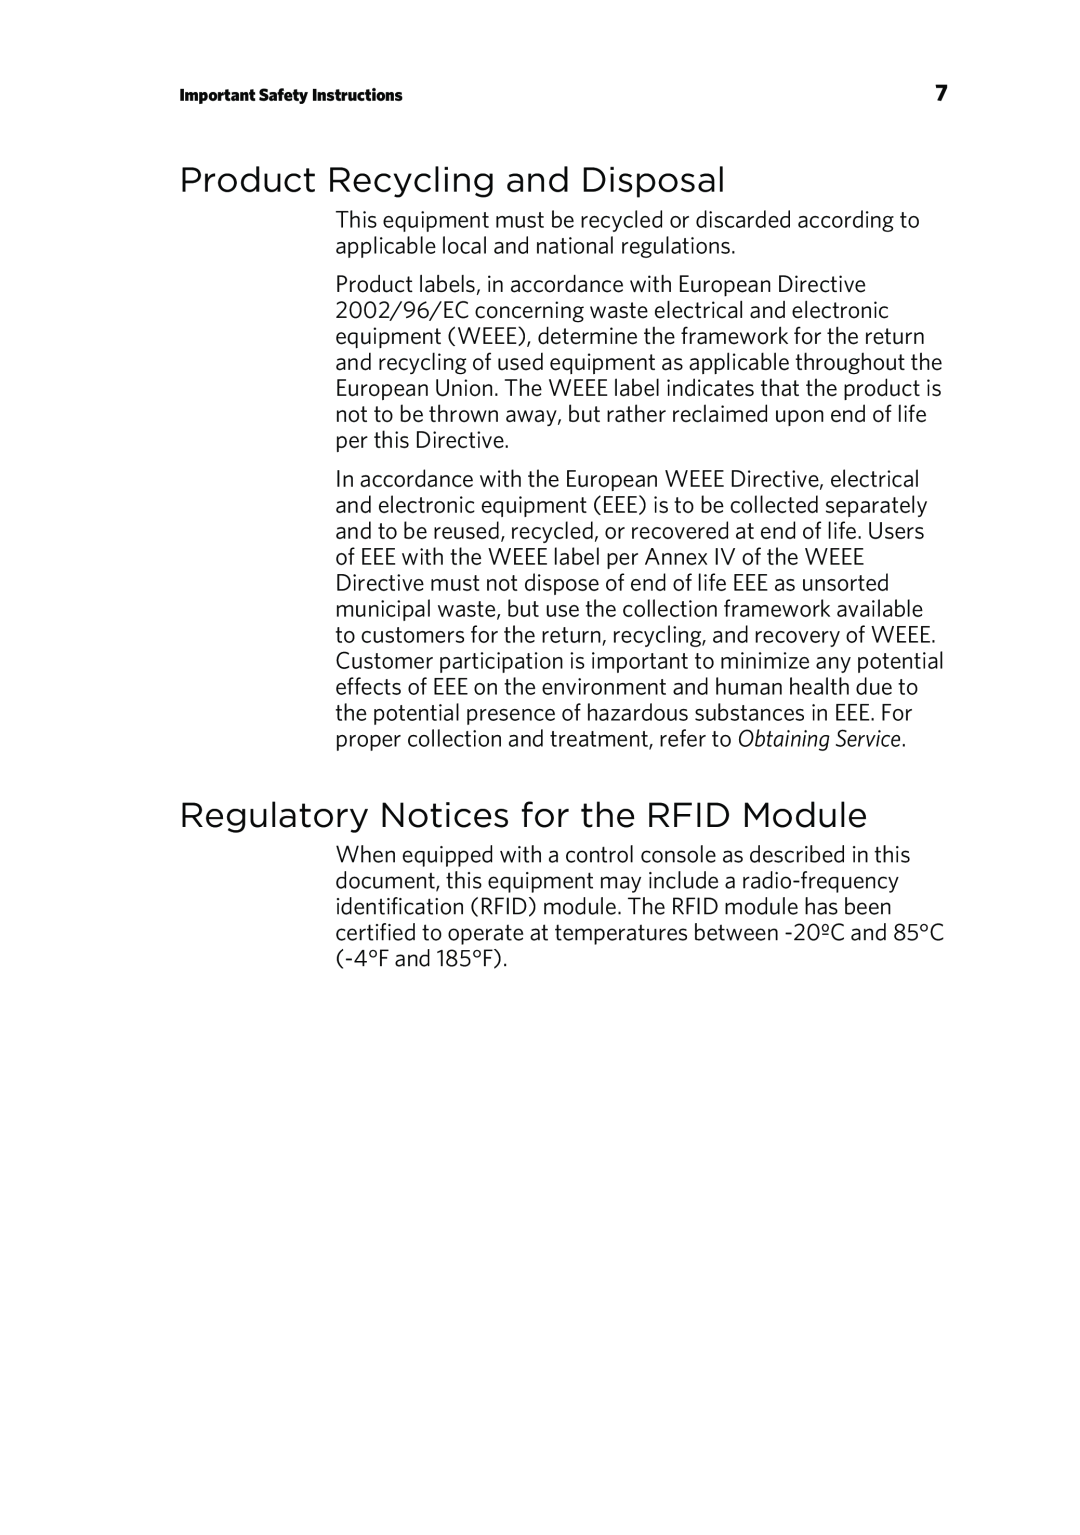 Precor P80 manual Product Recycling and Disposal, Regulatory Notices for the RFID Module 